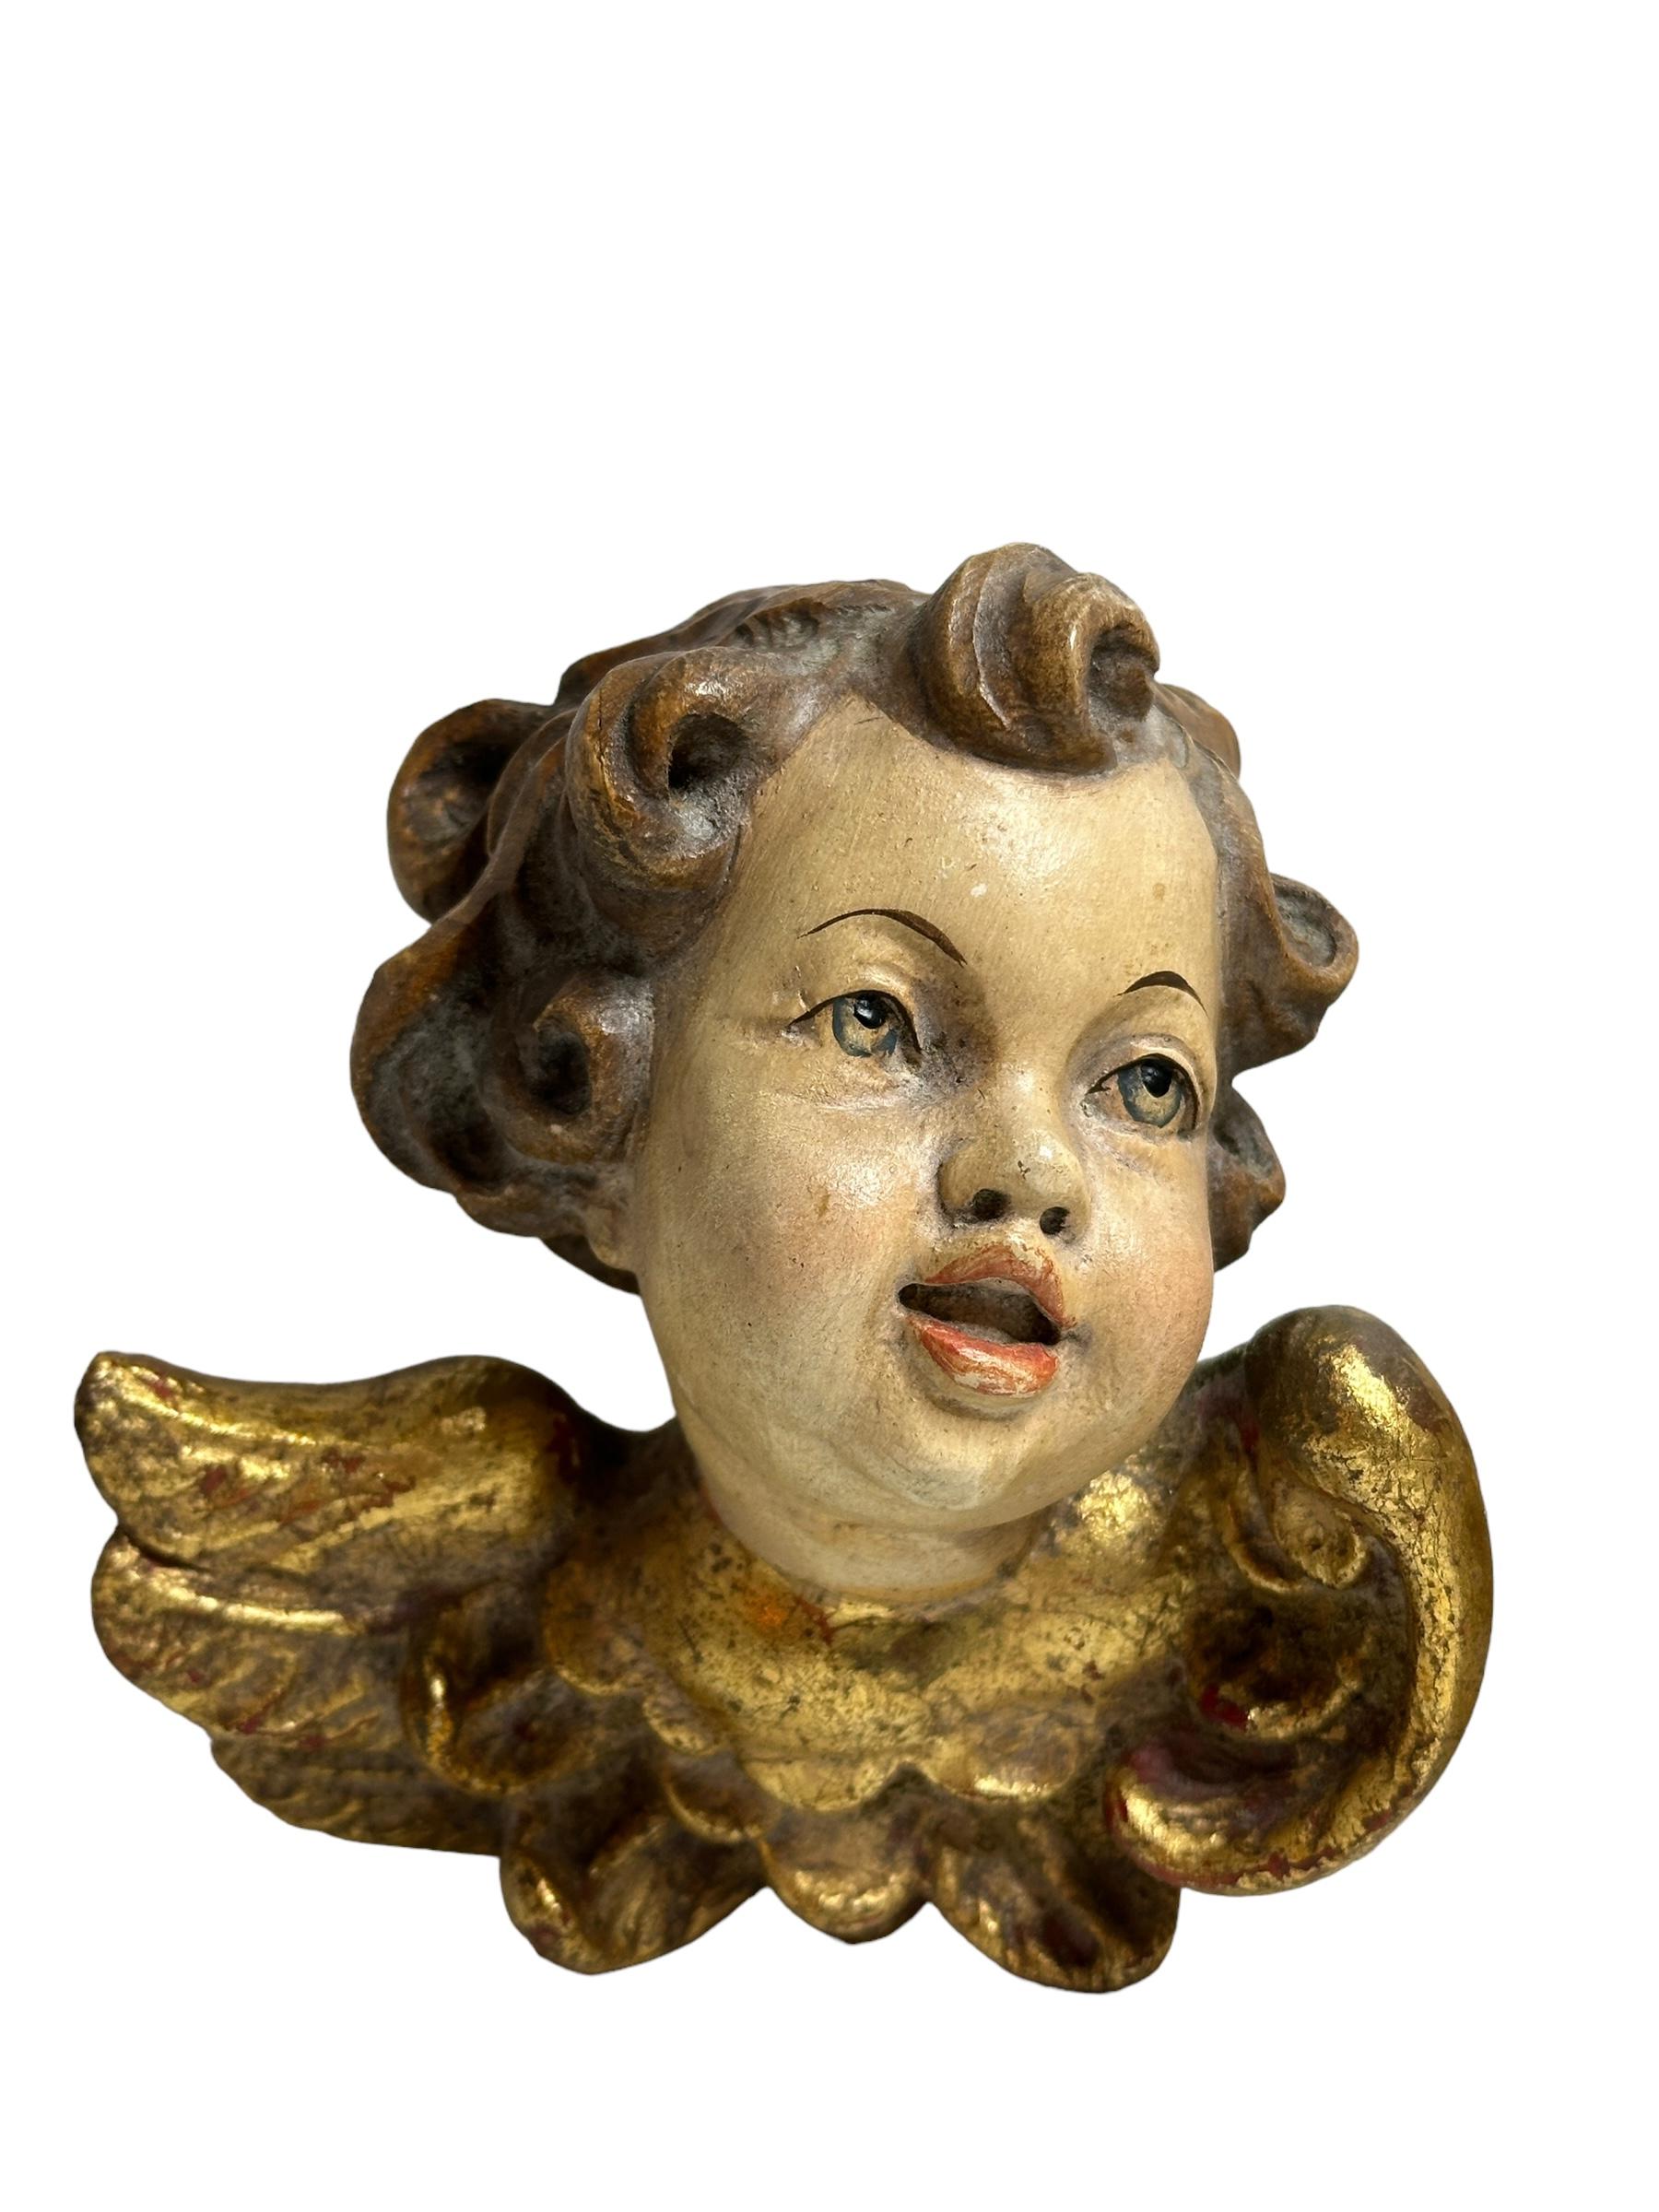 A pair beautiful hand carved and hand painted cherub angel Heads, found at an estate sale in Germany. Made by a woodcarver in the Oberammergau area, this area is well-known for their wood carvings. The size given in the dimensions section refers to